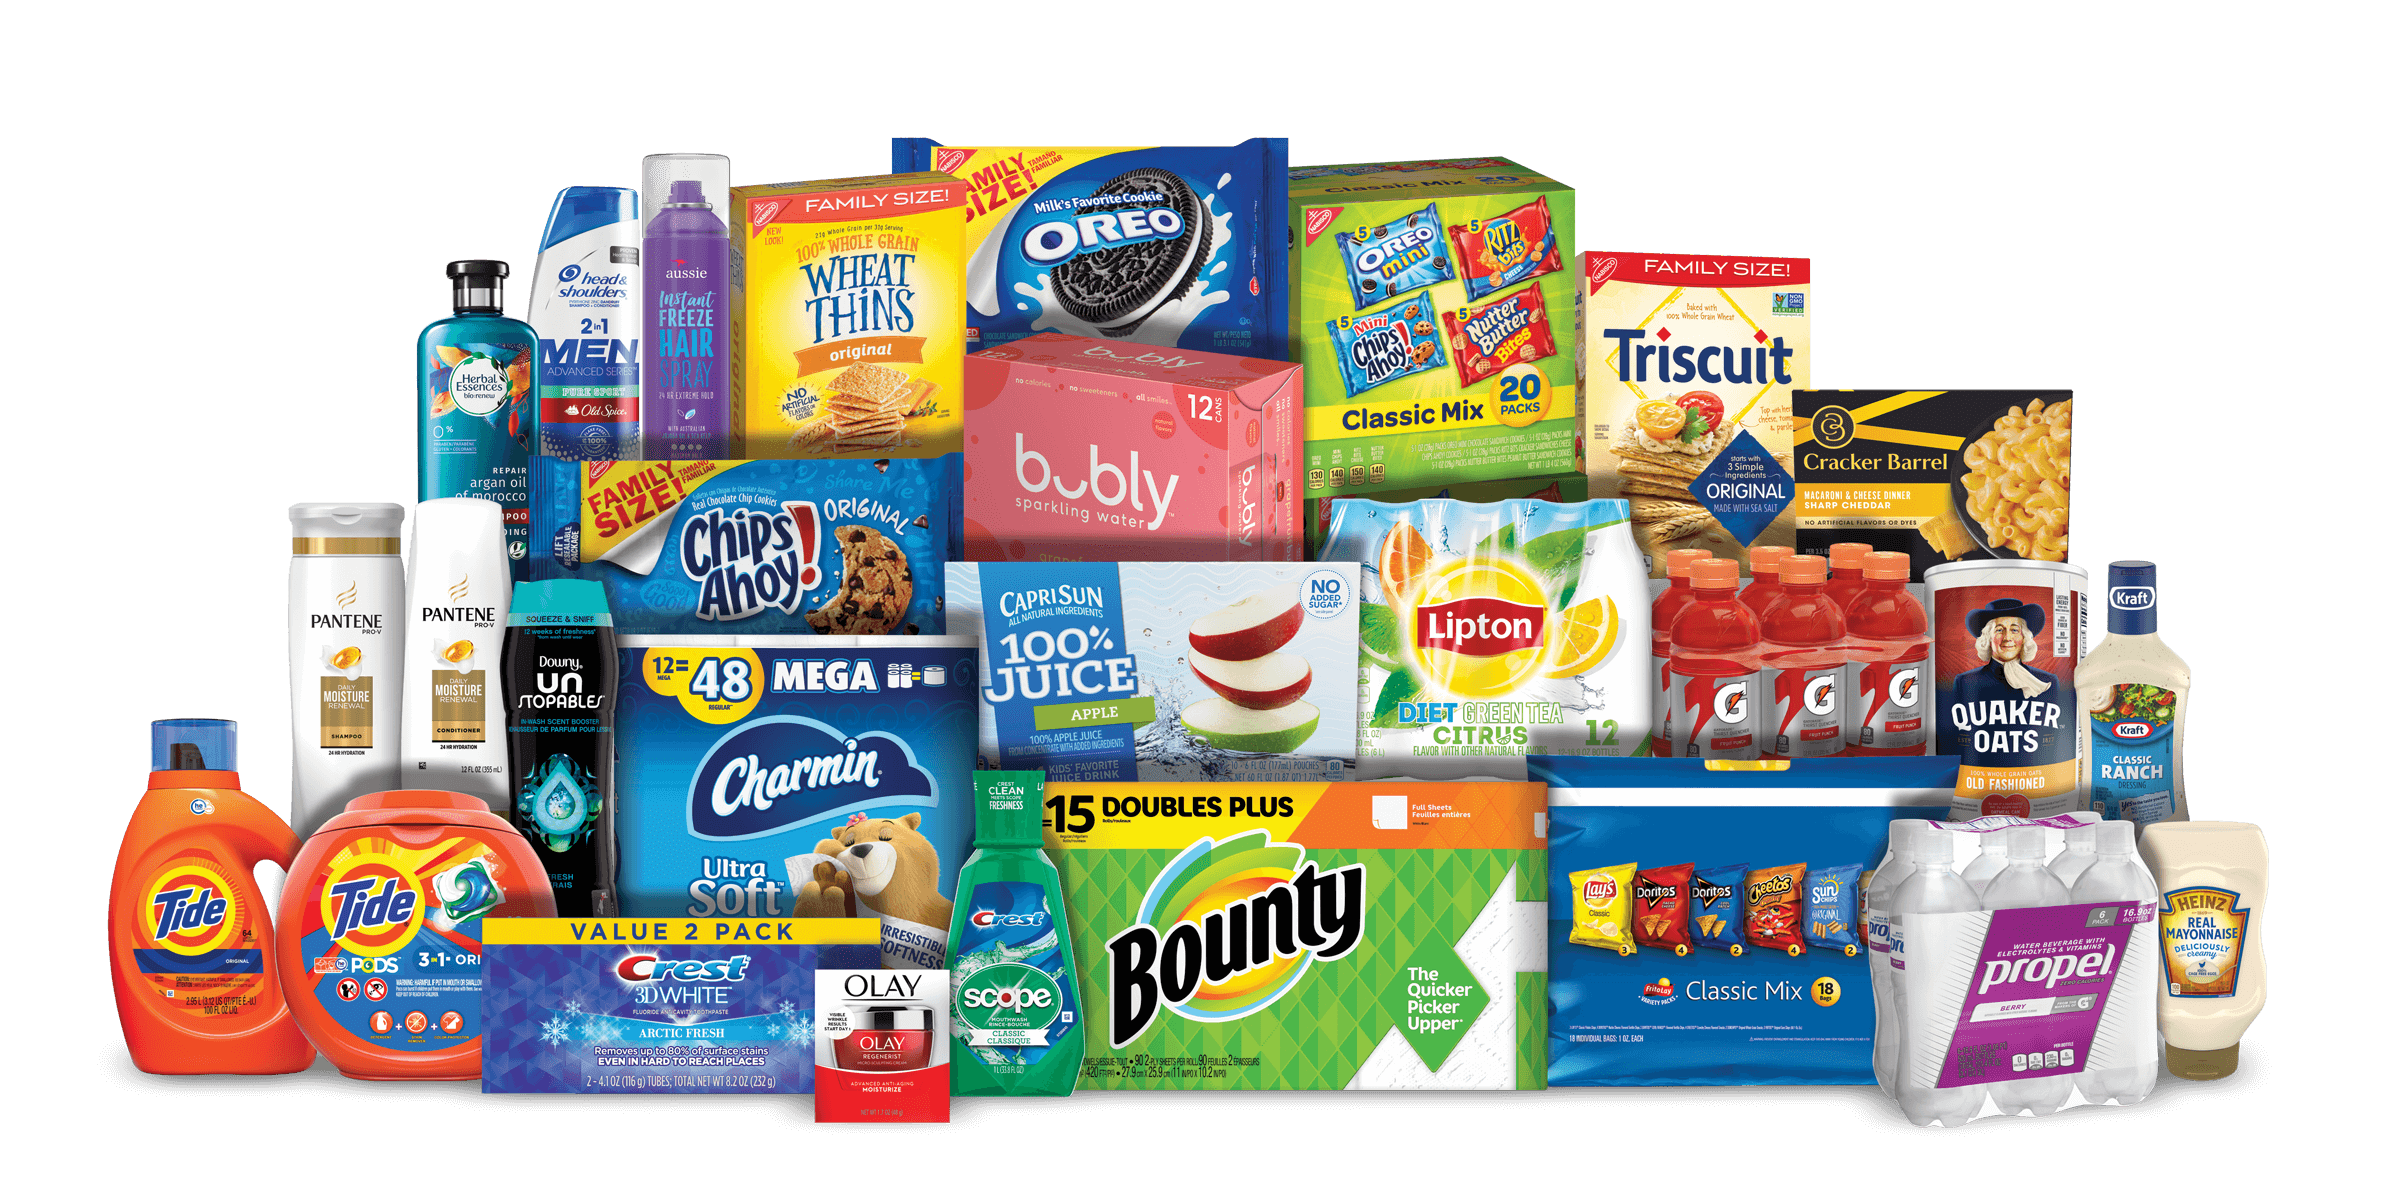 stocking-spree-rewards-exclusively-at-publix